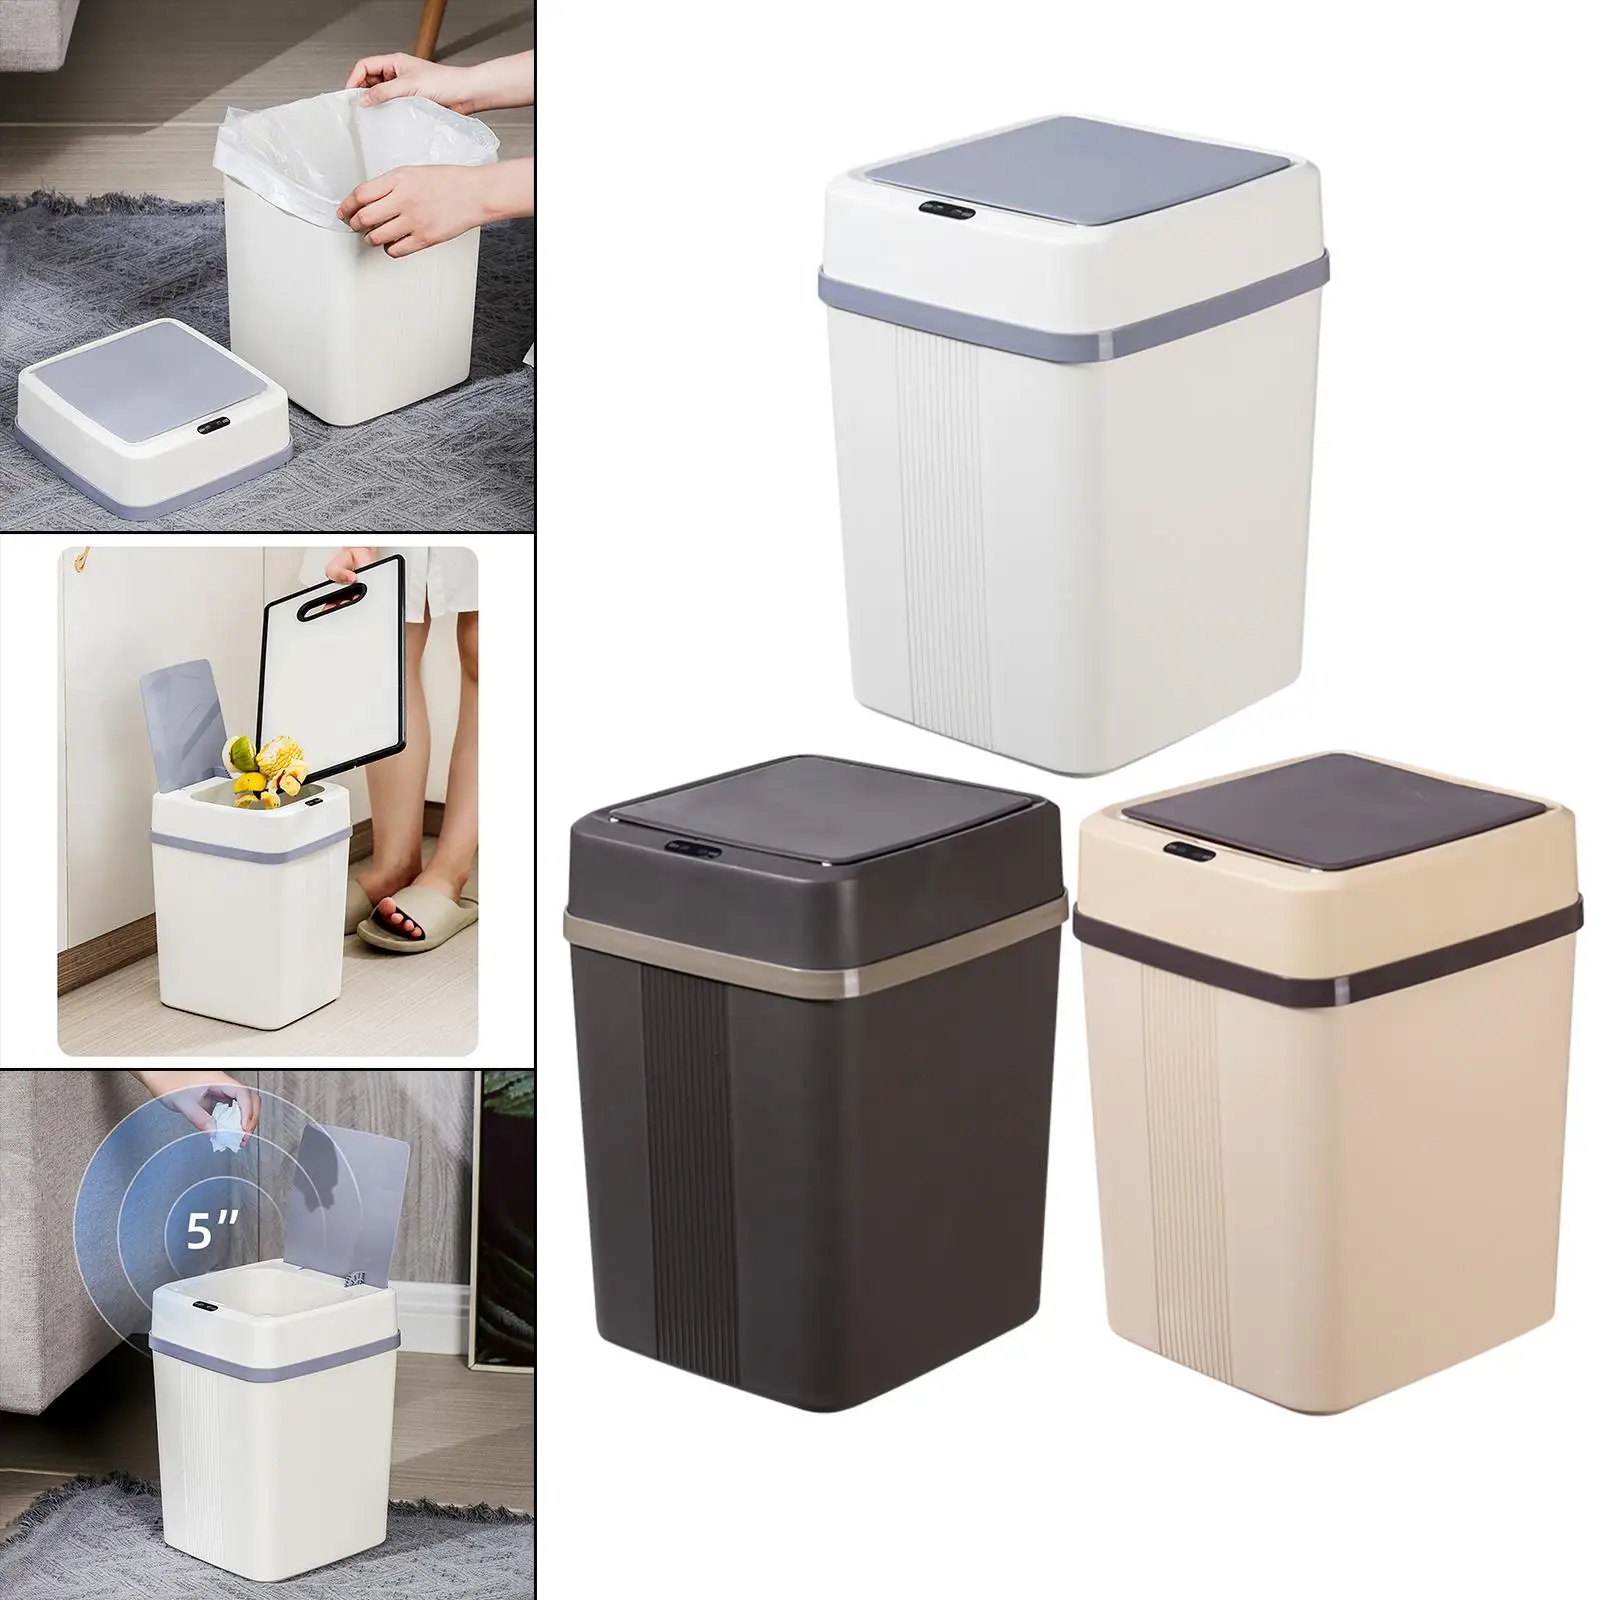 Intelligent Trash Can Waterproof Cleaning Creative Automatic Sensor Plastic Dustbin for Toilet Bathroom Kitchen Household Home